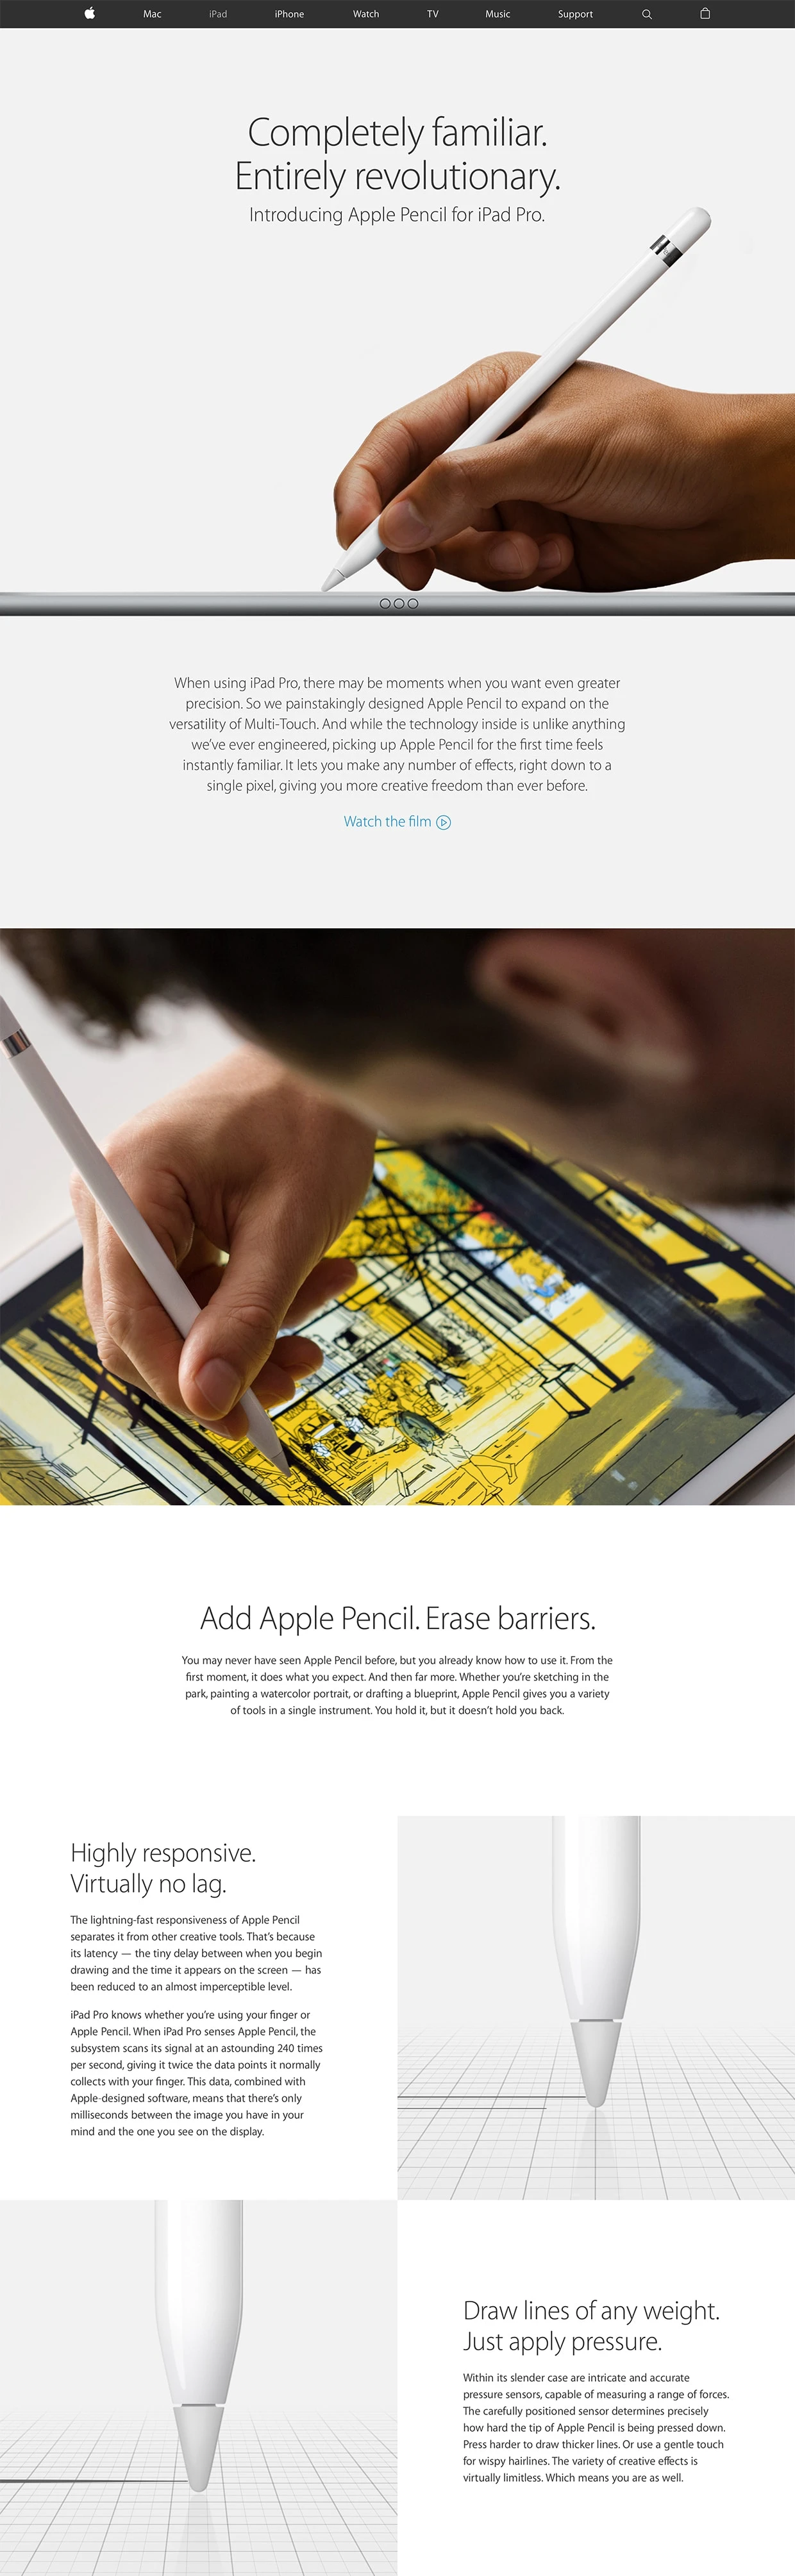 Apple Pencil Landing Page Example: Apple Pencil for iPad Pro. Completely familiar. Entirely revolutionary.